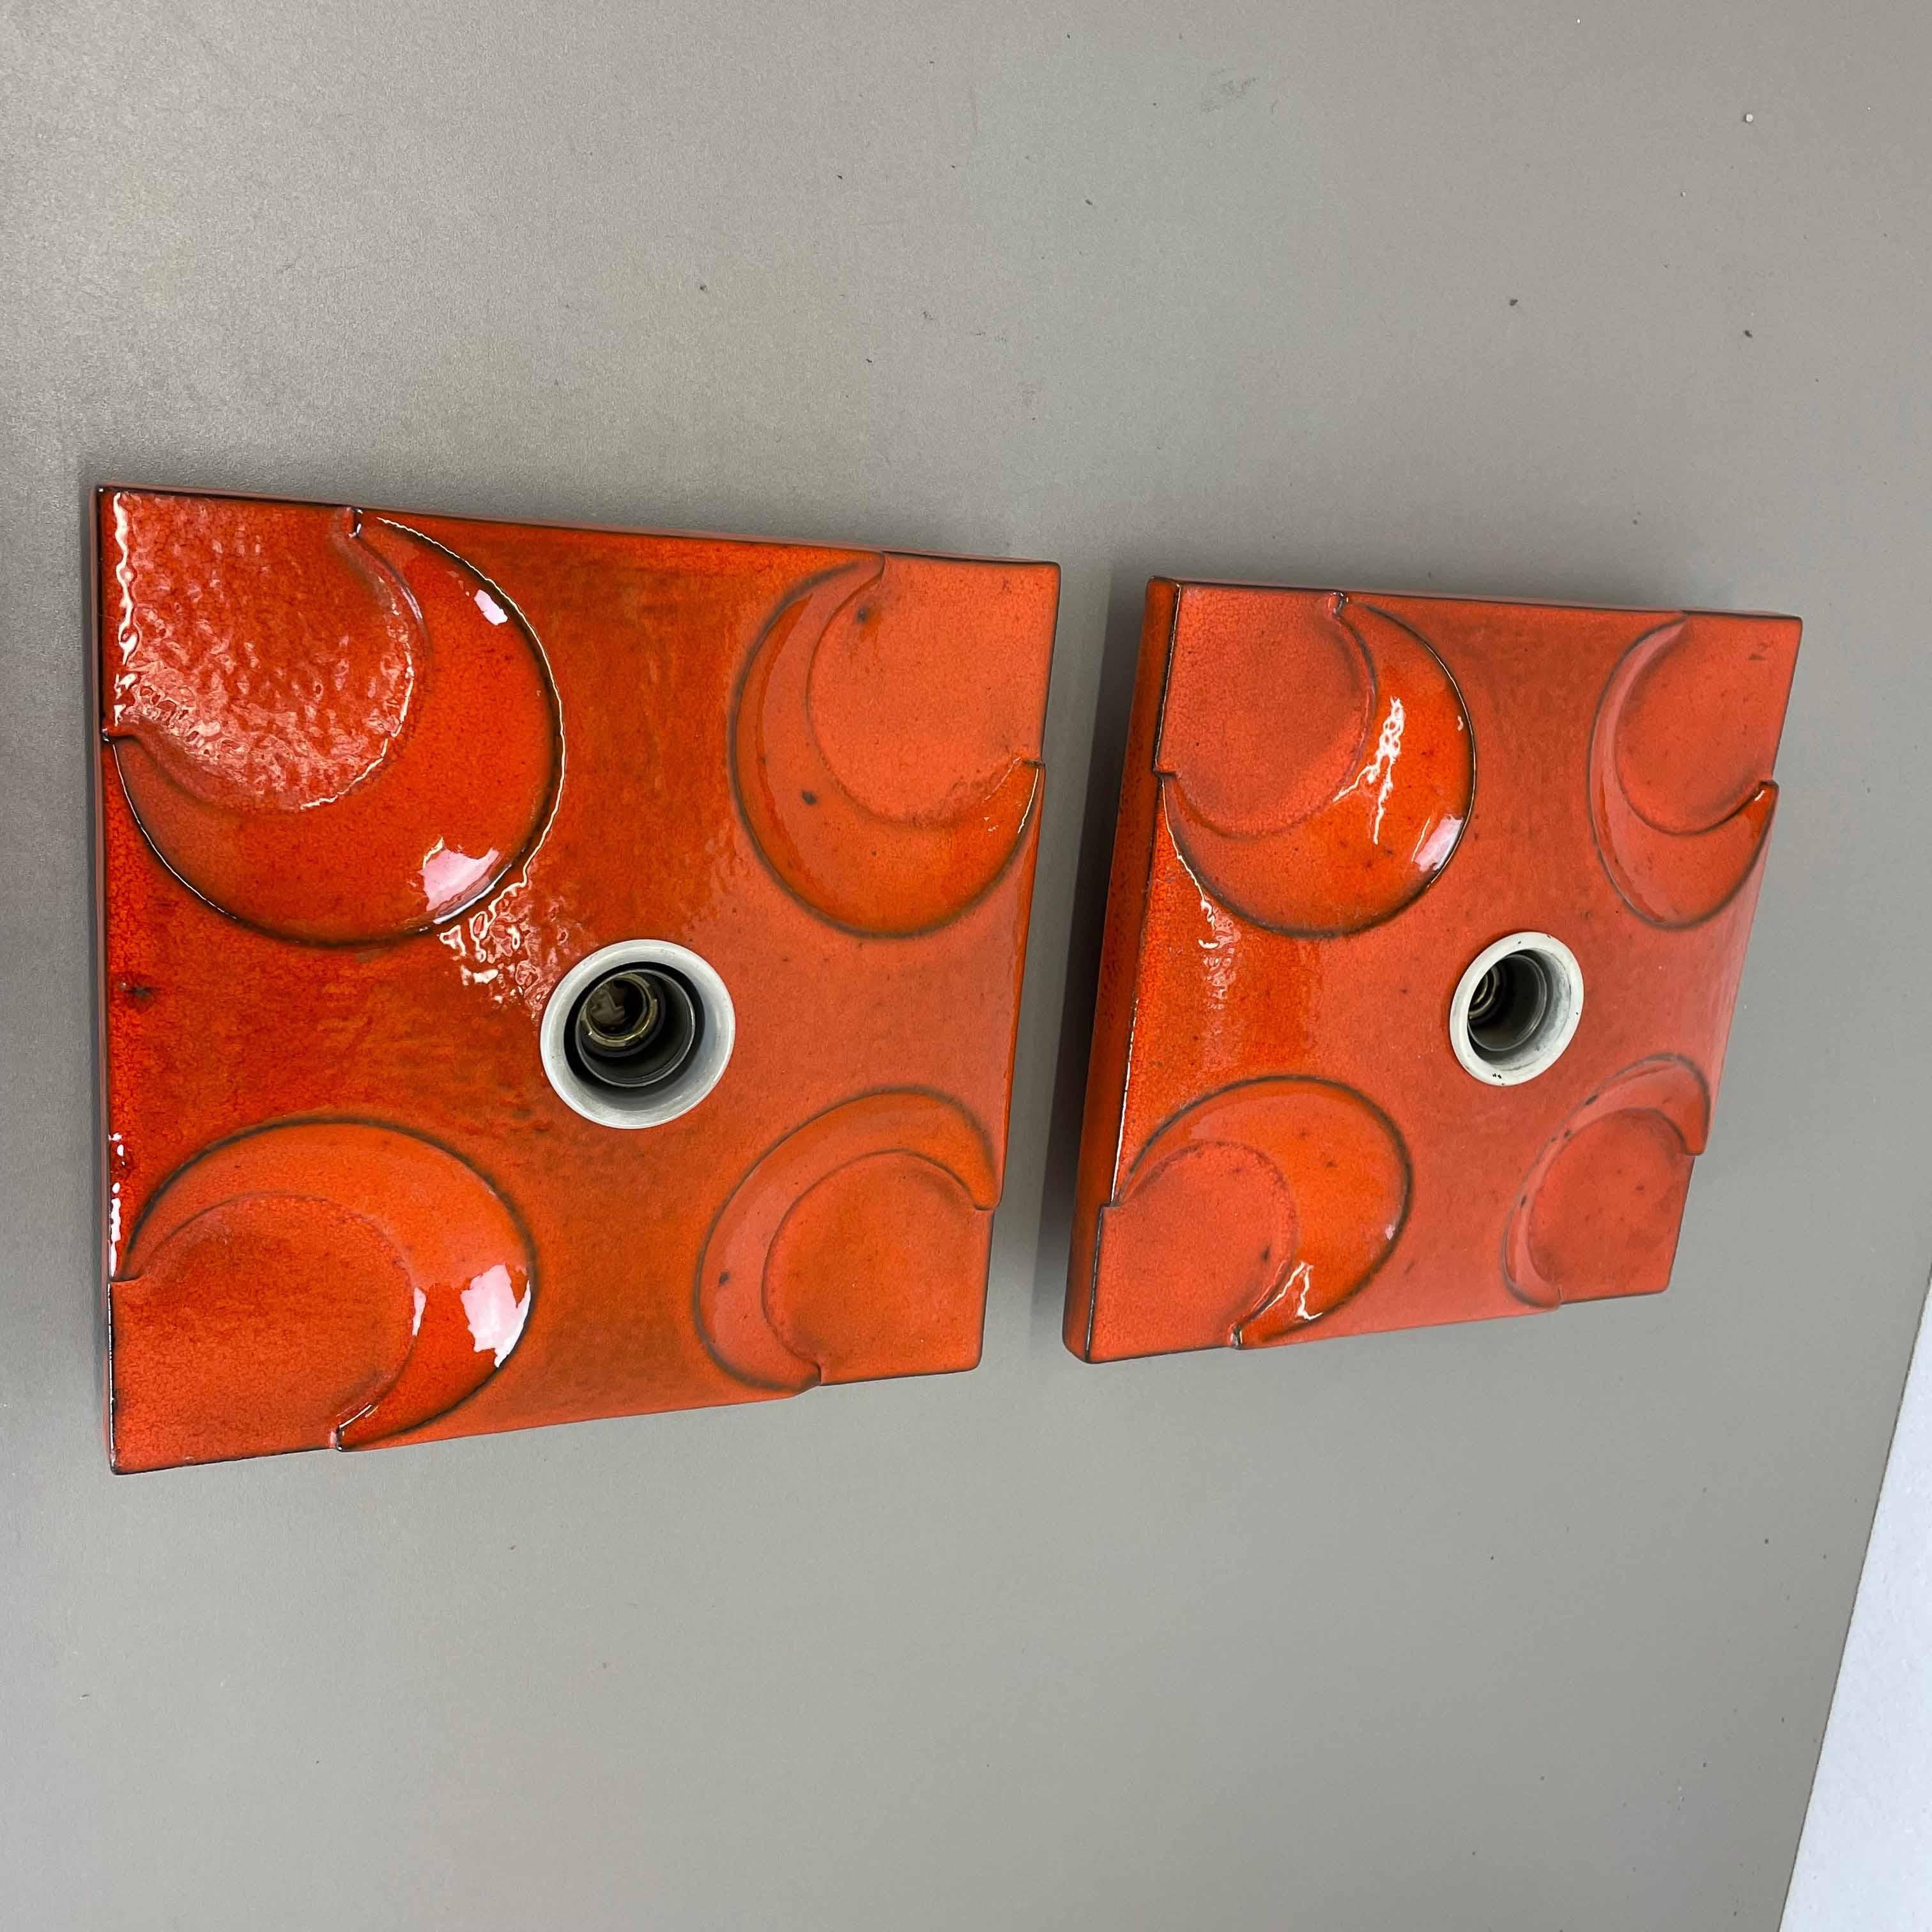 Article:

Wall light sconce set of two.


Producer:

Pan Ceramic, Germany.



Origin:

Germany.



Age:

1970s.



Description:

Original 1970s modernist German wall light made of ceramic in fat lava optic. This super rare